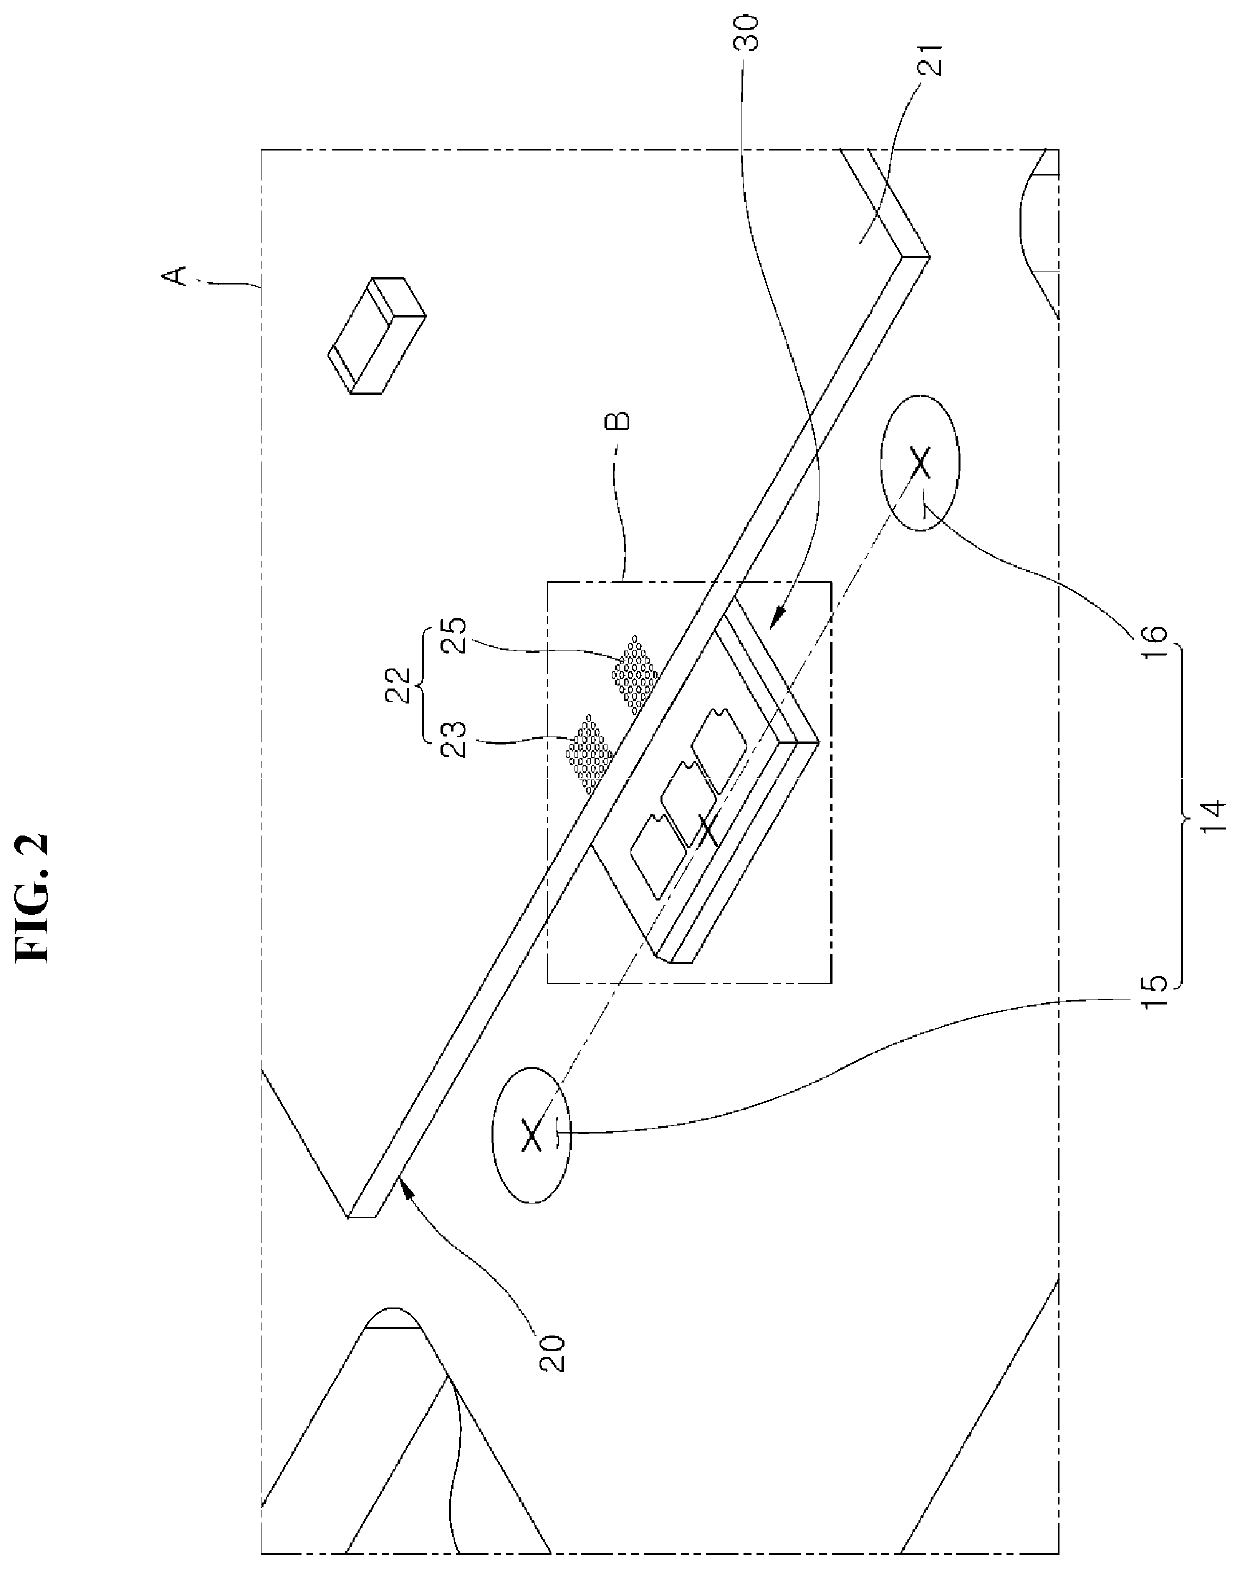 LED lamp apparatus for vehicle